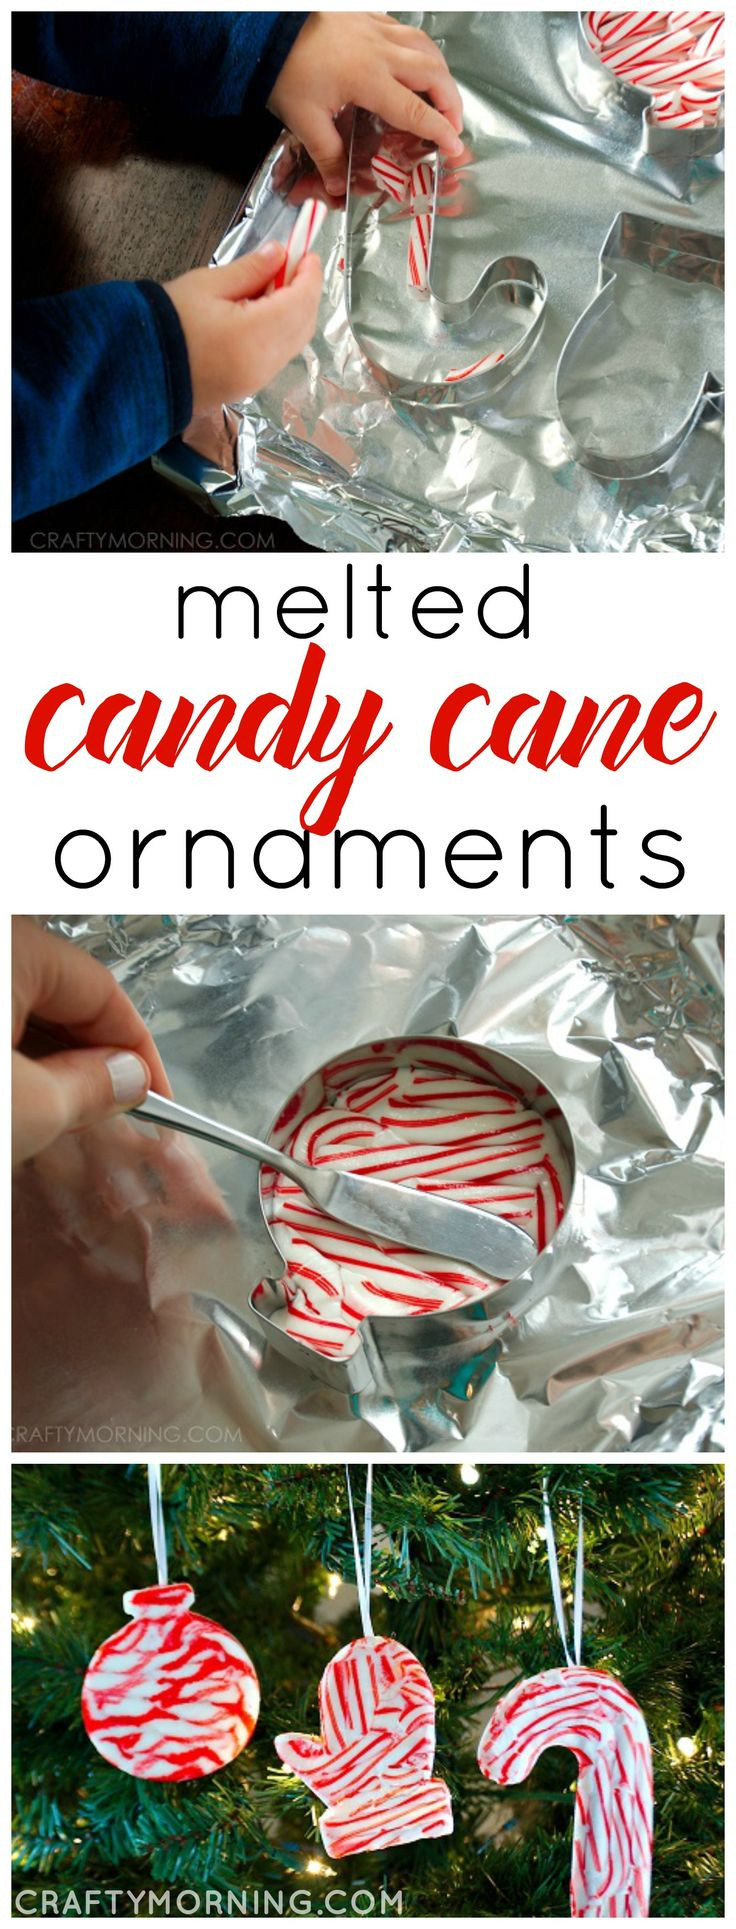 Fun Christmas Candy
 25 best ideas about Candy cane crafts on Pinterest